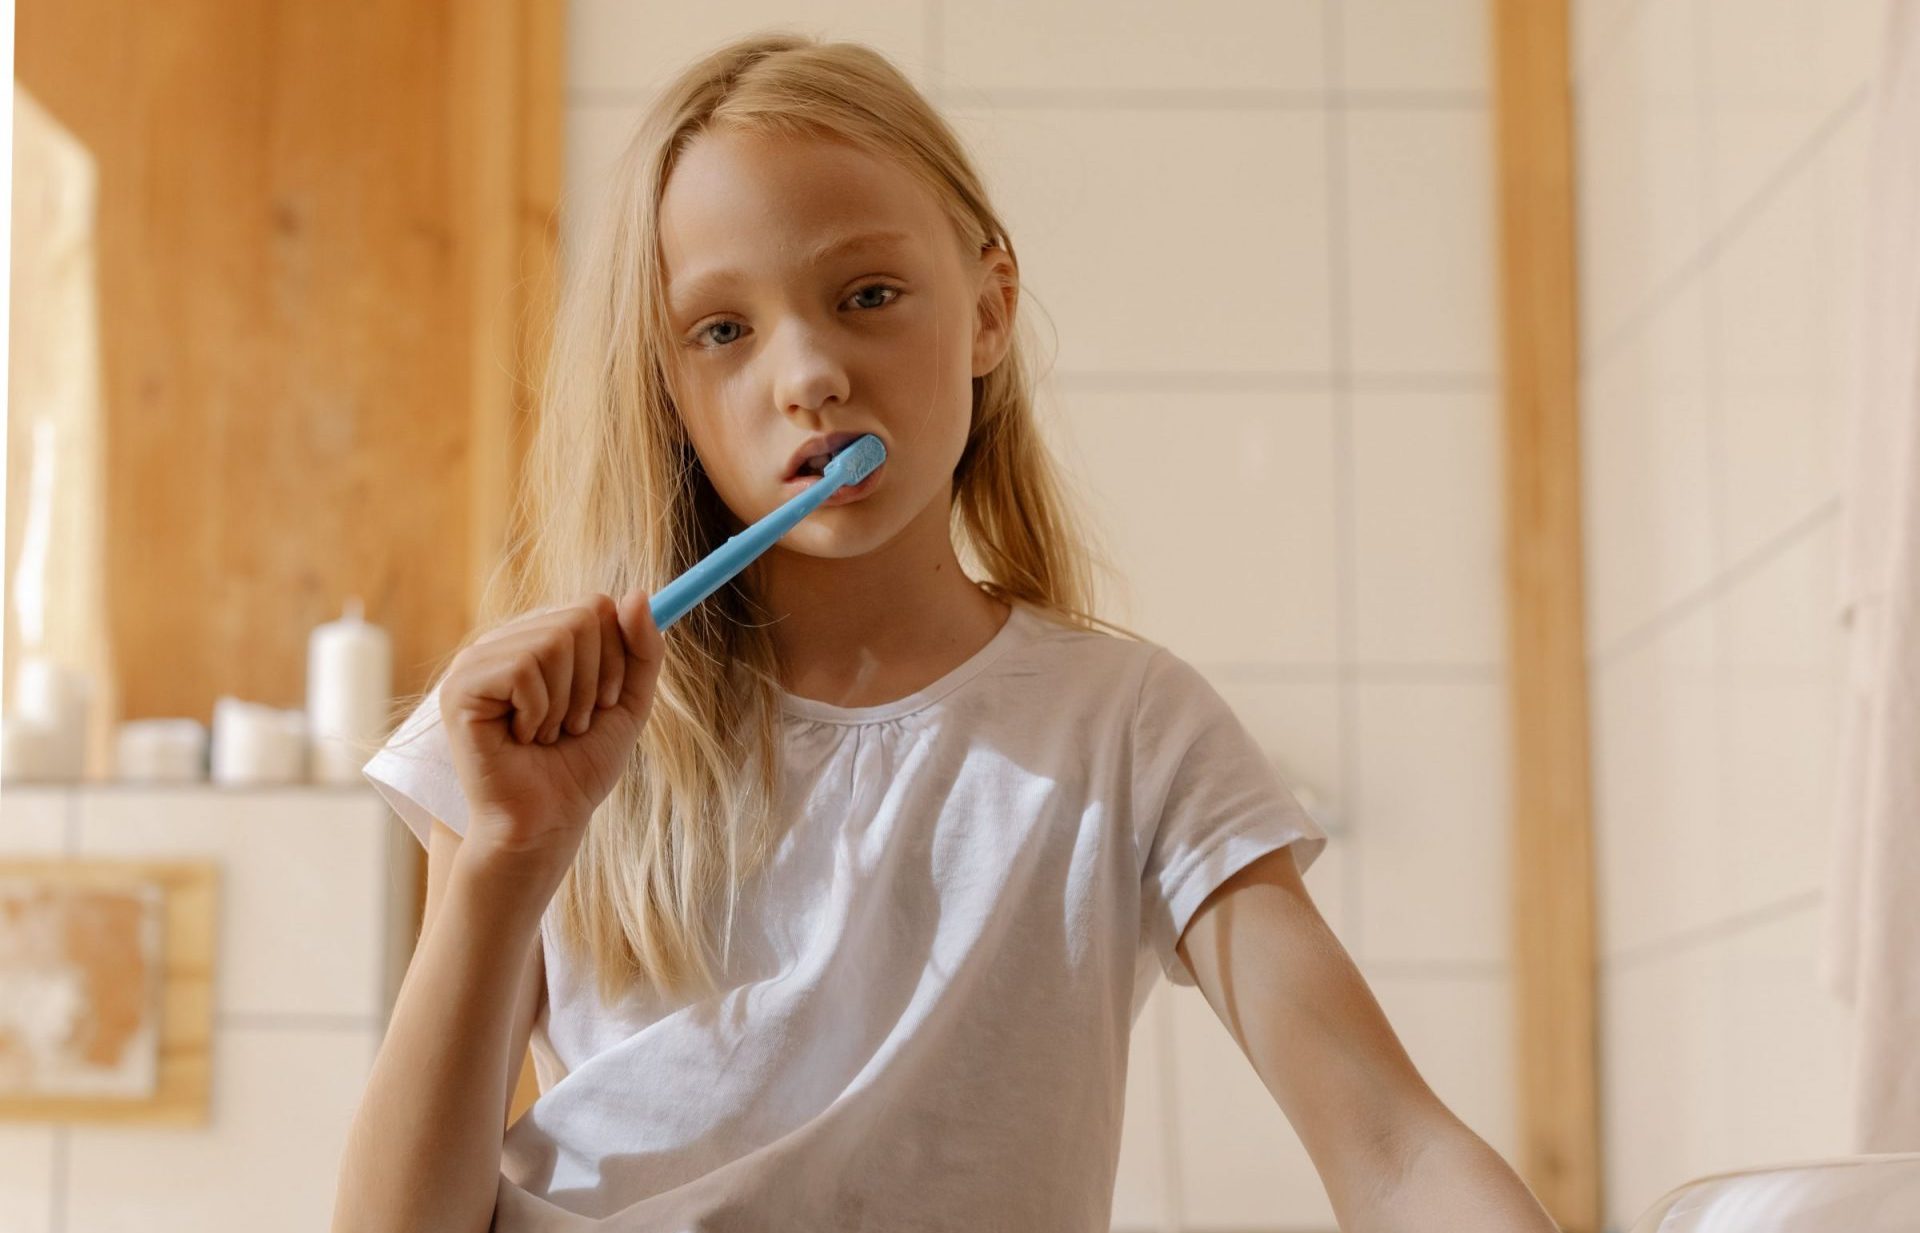 How To Brush Your Teeth Advanced Indiana Anderson In